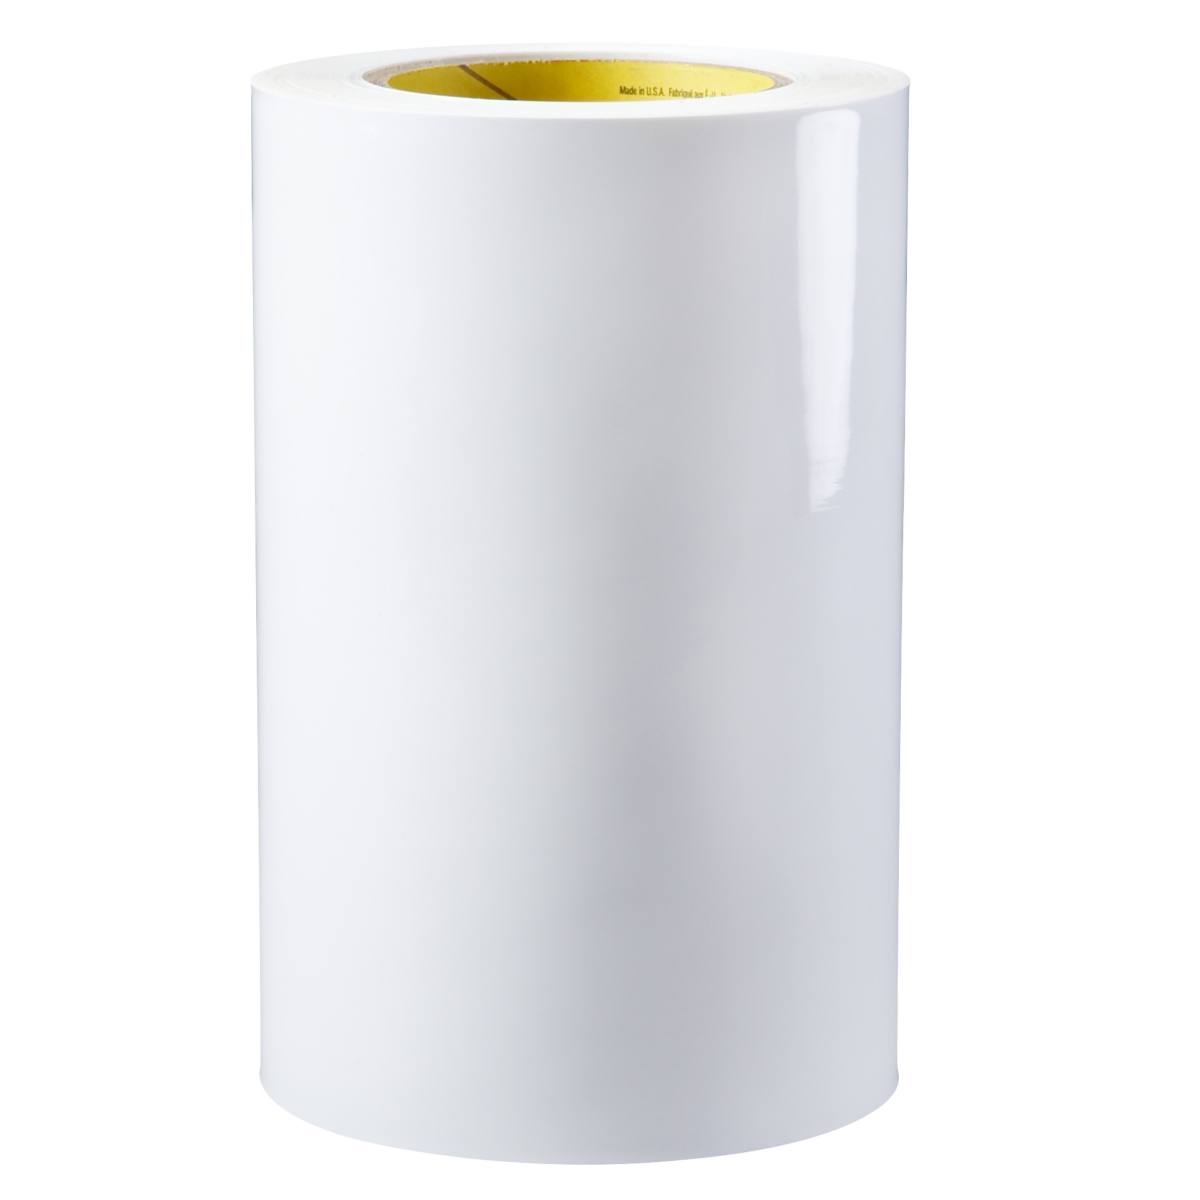 3M Wind Protection Tape W8751, transparent, 254mm x 33m, 0.36mm